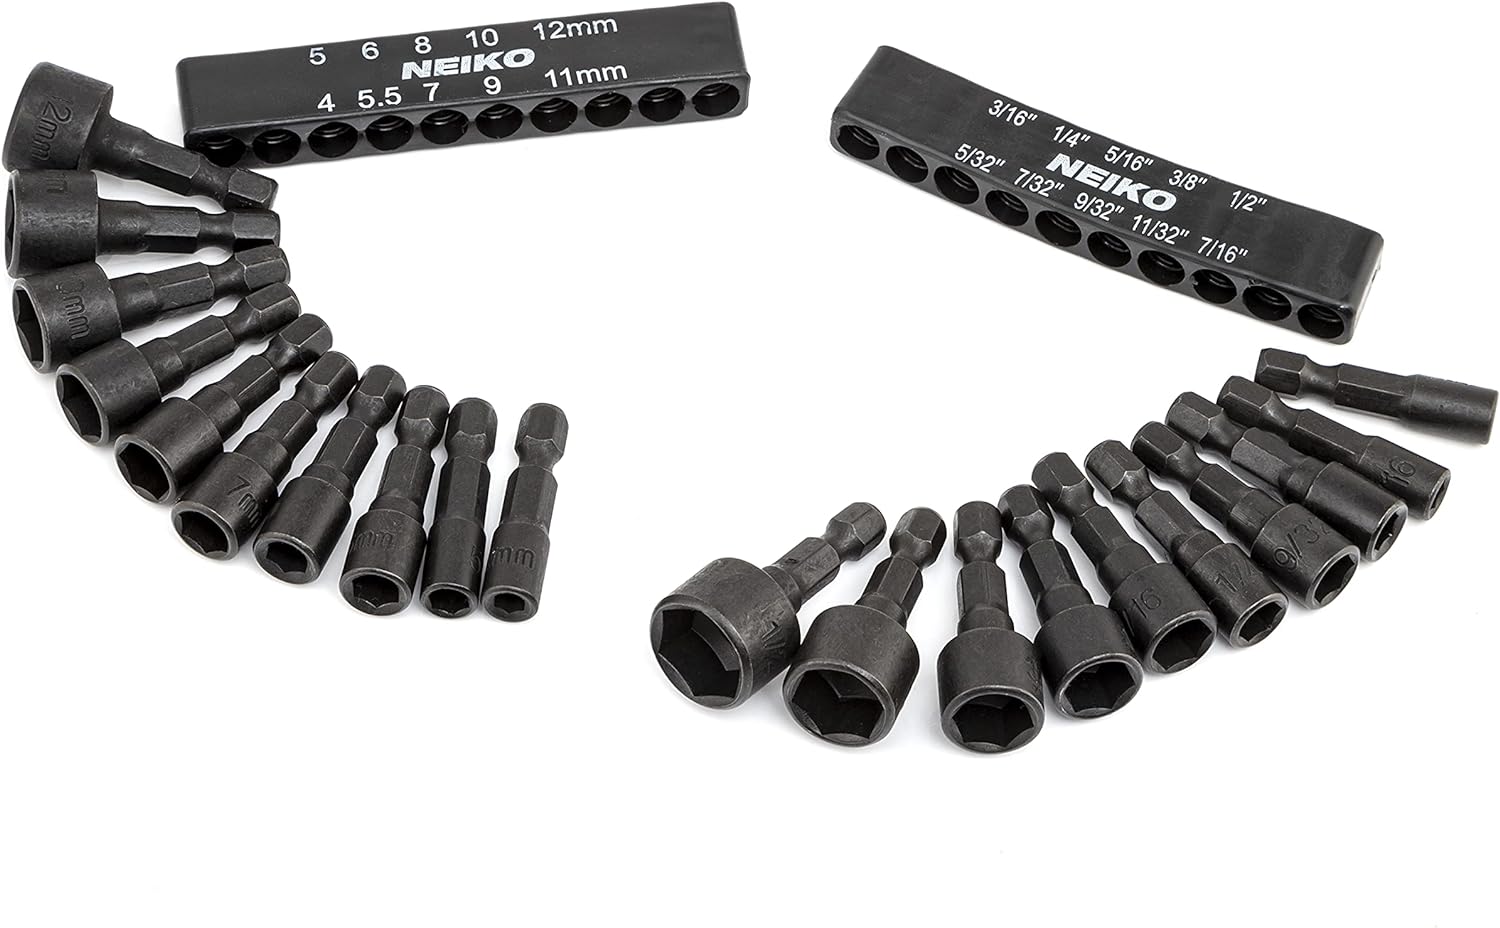 Ridgerock Tools Inc. NEIKO 10068A Nut Driver Set, For Impact Drill and Driver, 20 Piece, 1/4&#226;&#128;&#157; Hex Small Nut Driver Bit